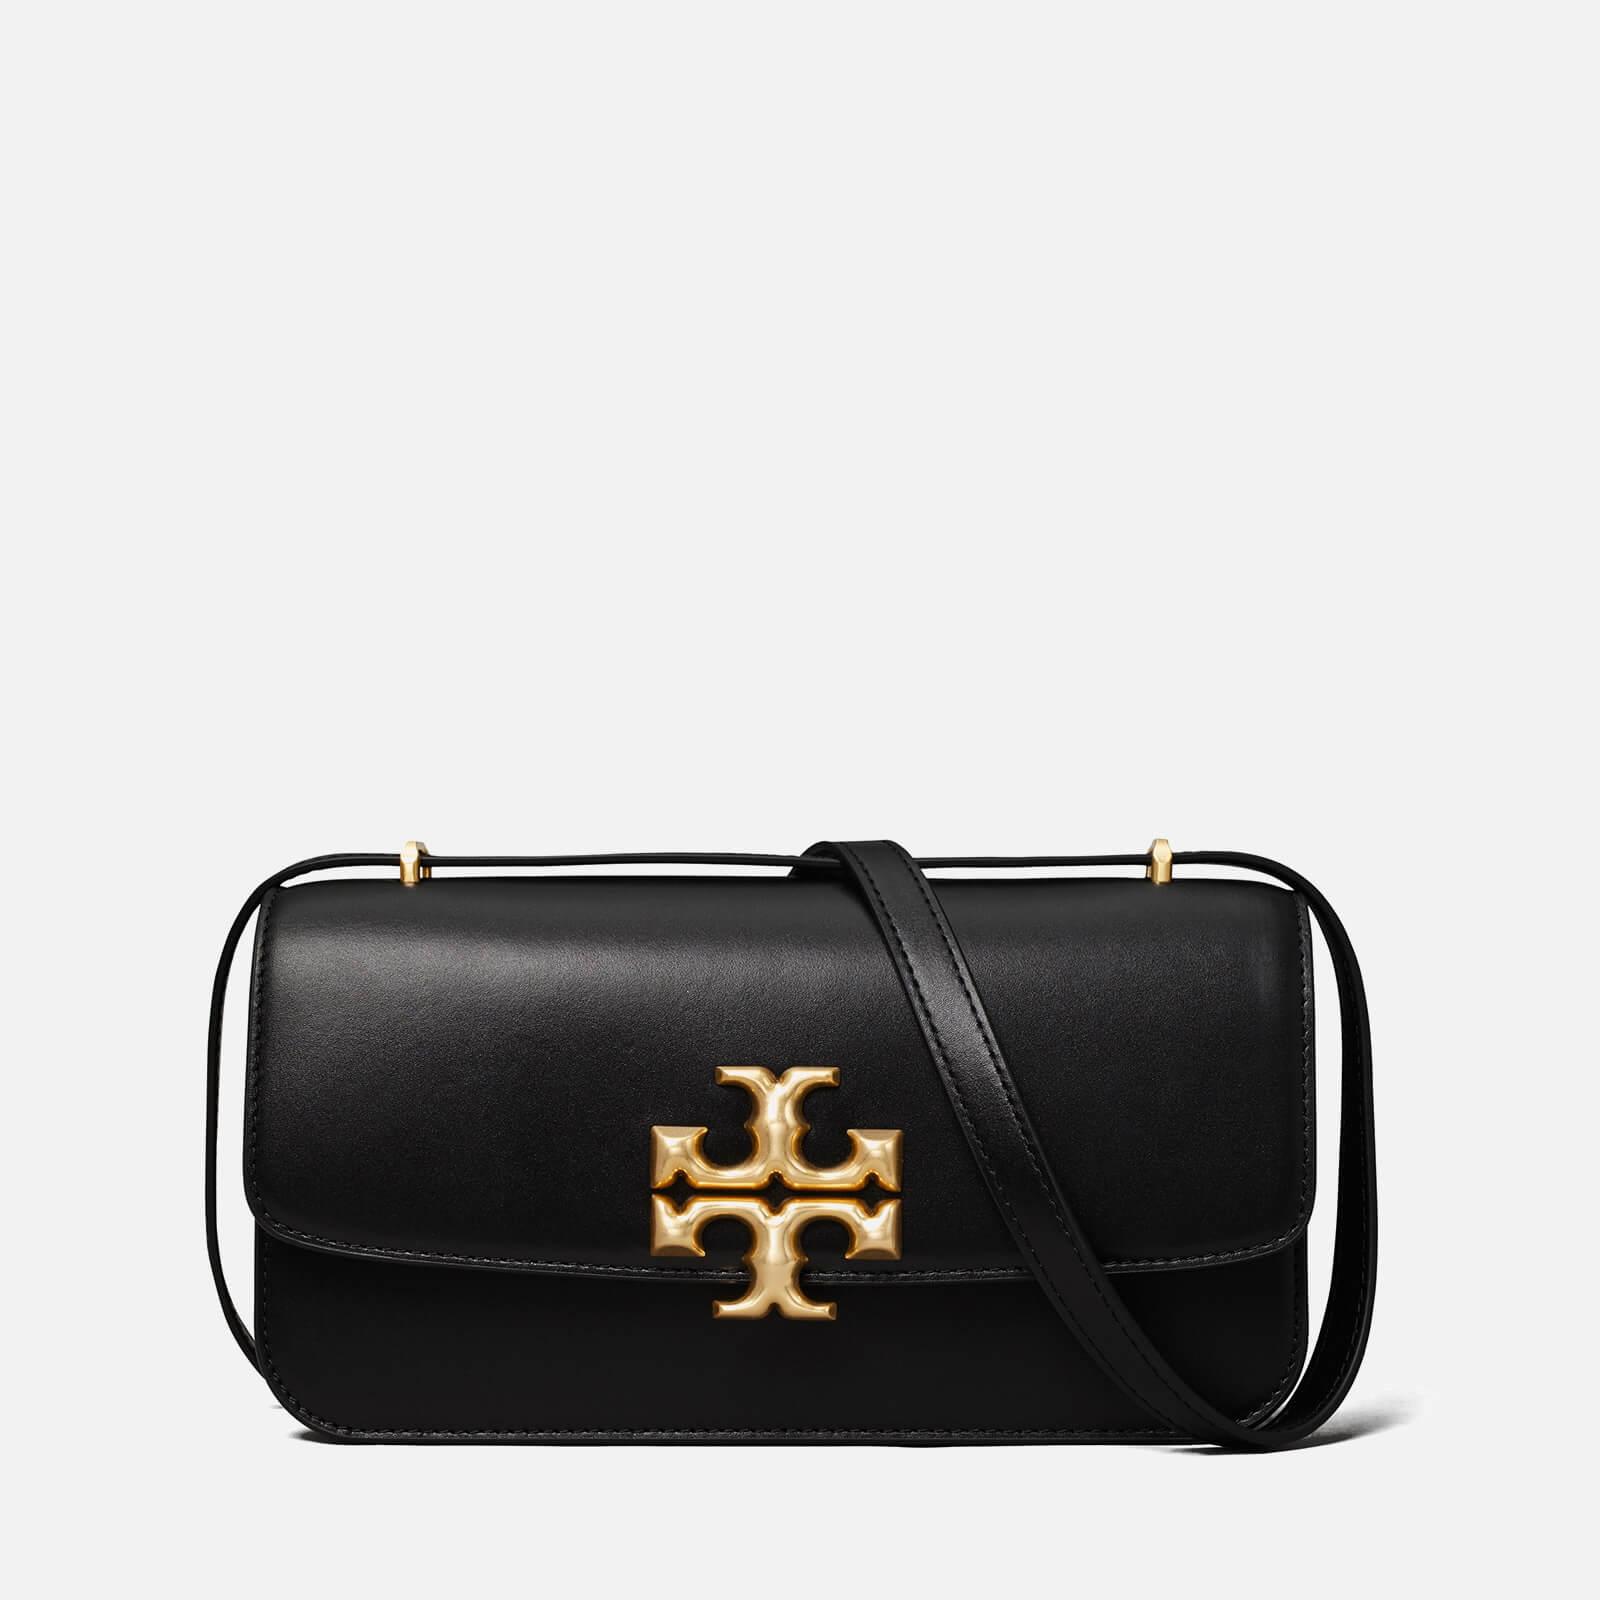 Tory Burch Small Eleanor Leather Bag in Black | Lyst